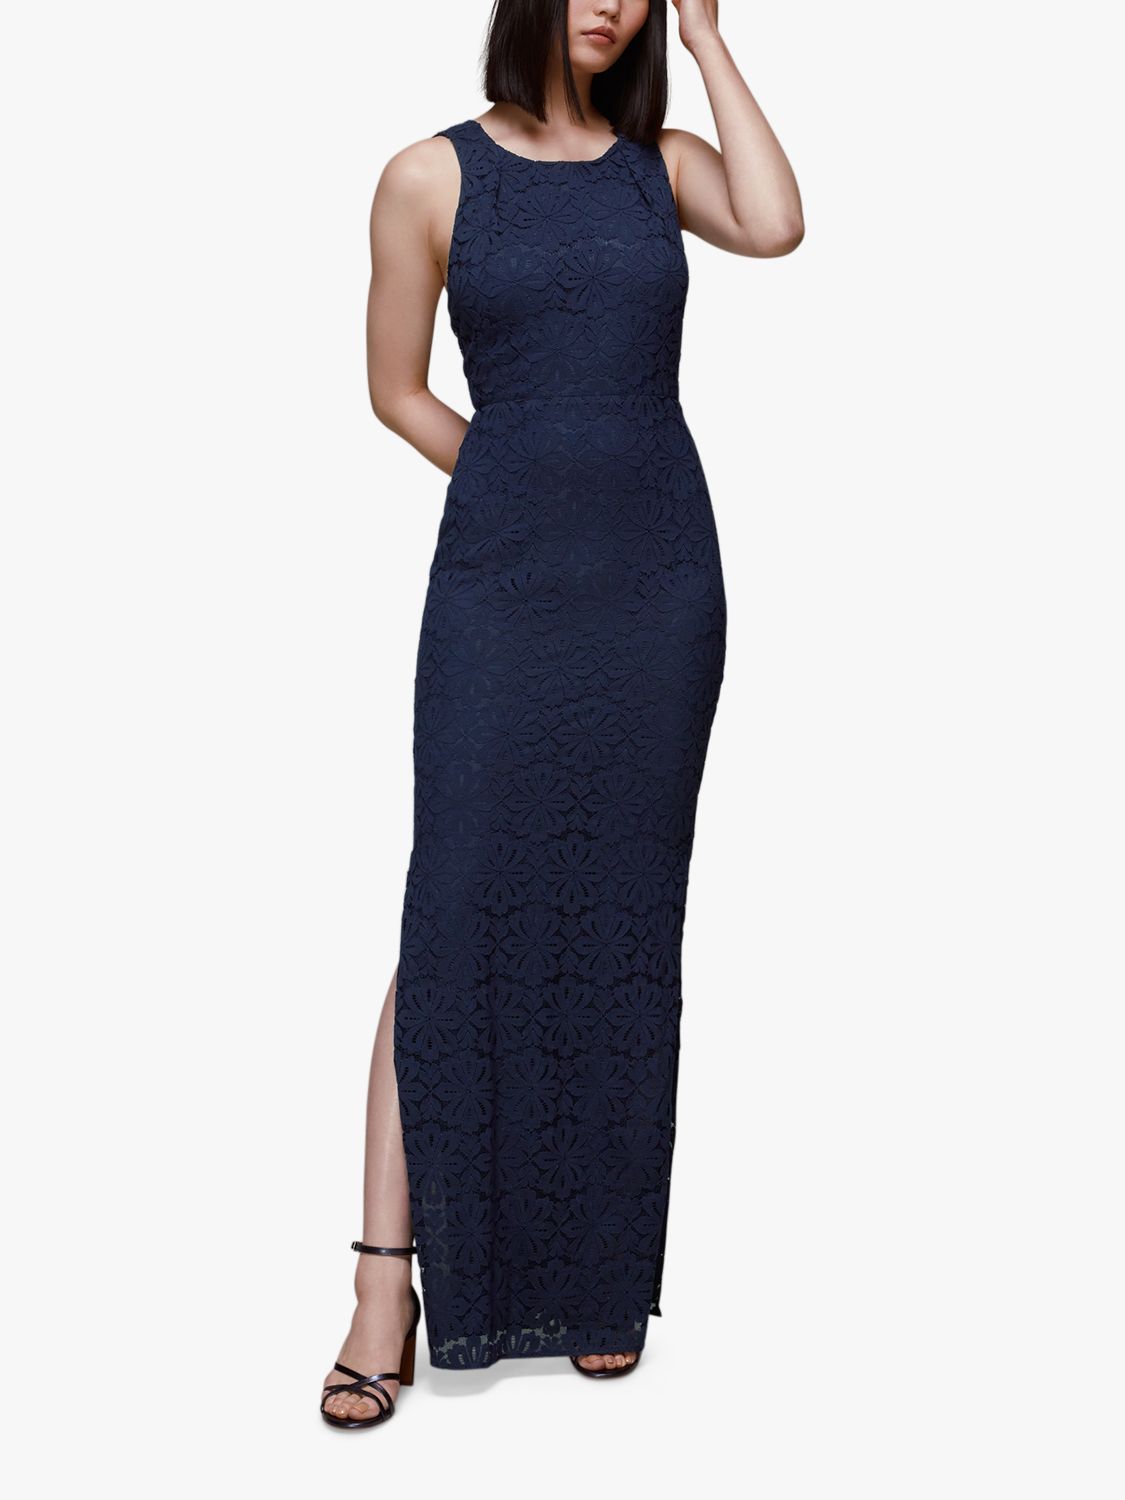 Whistles  Lace Tie Back Maxi Dress, Navy, 6